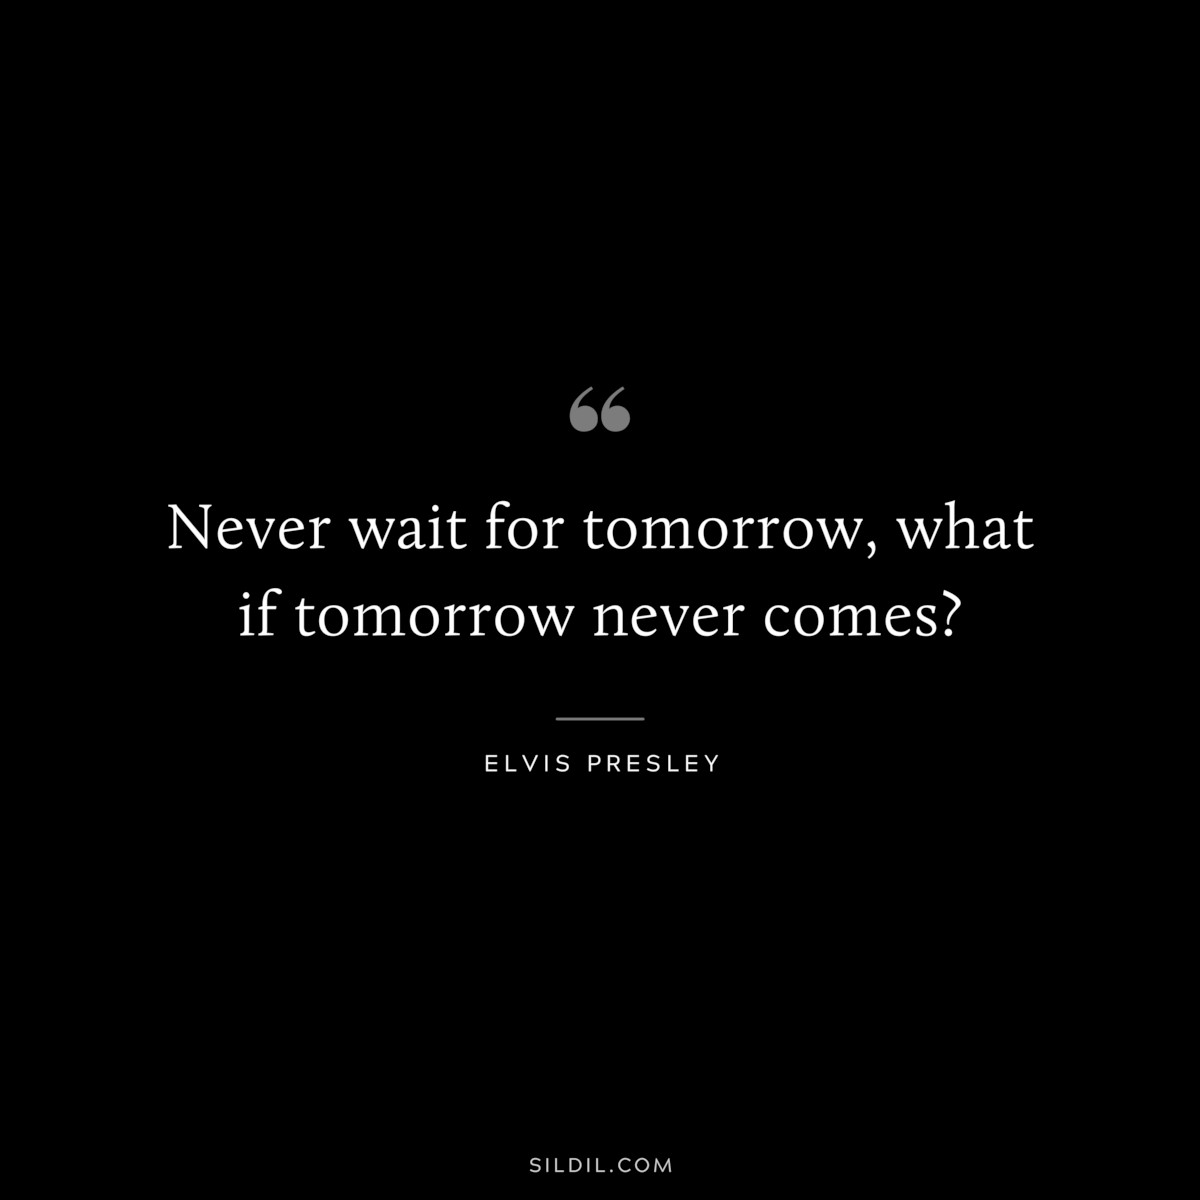 Never wait for tomorrow, what if tomorrow never comes? ― Elvis Presley